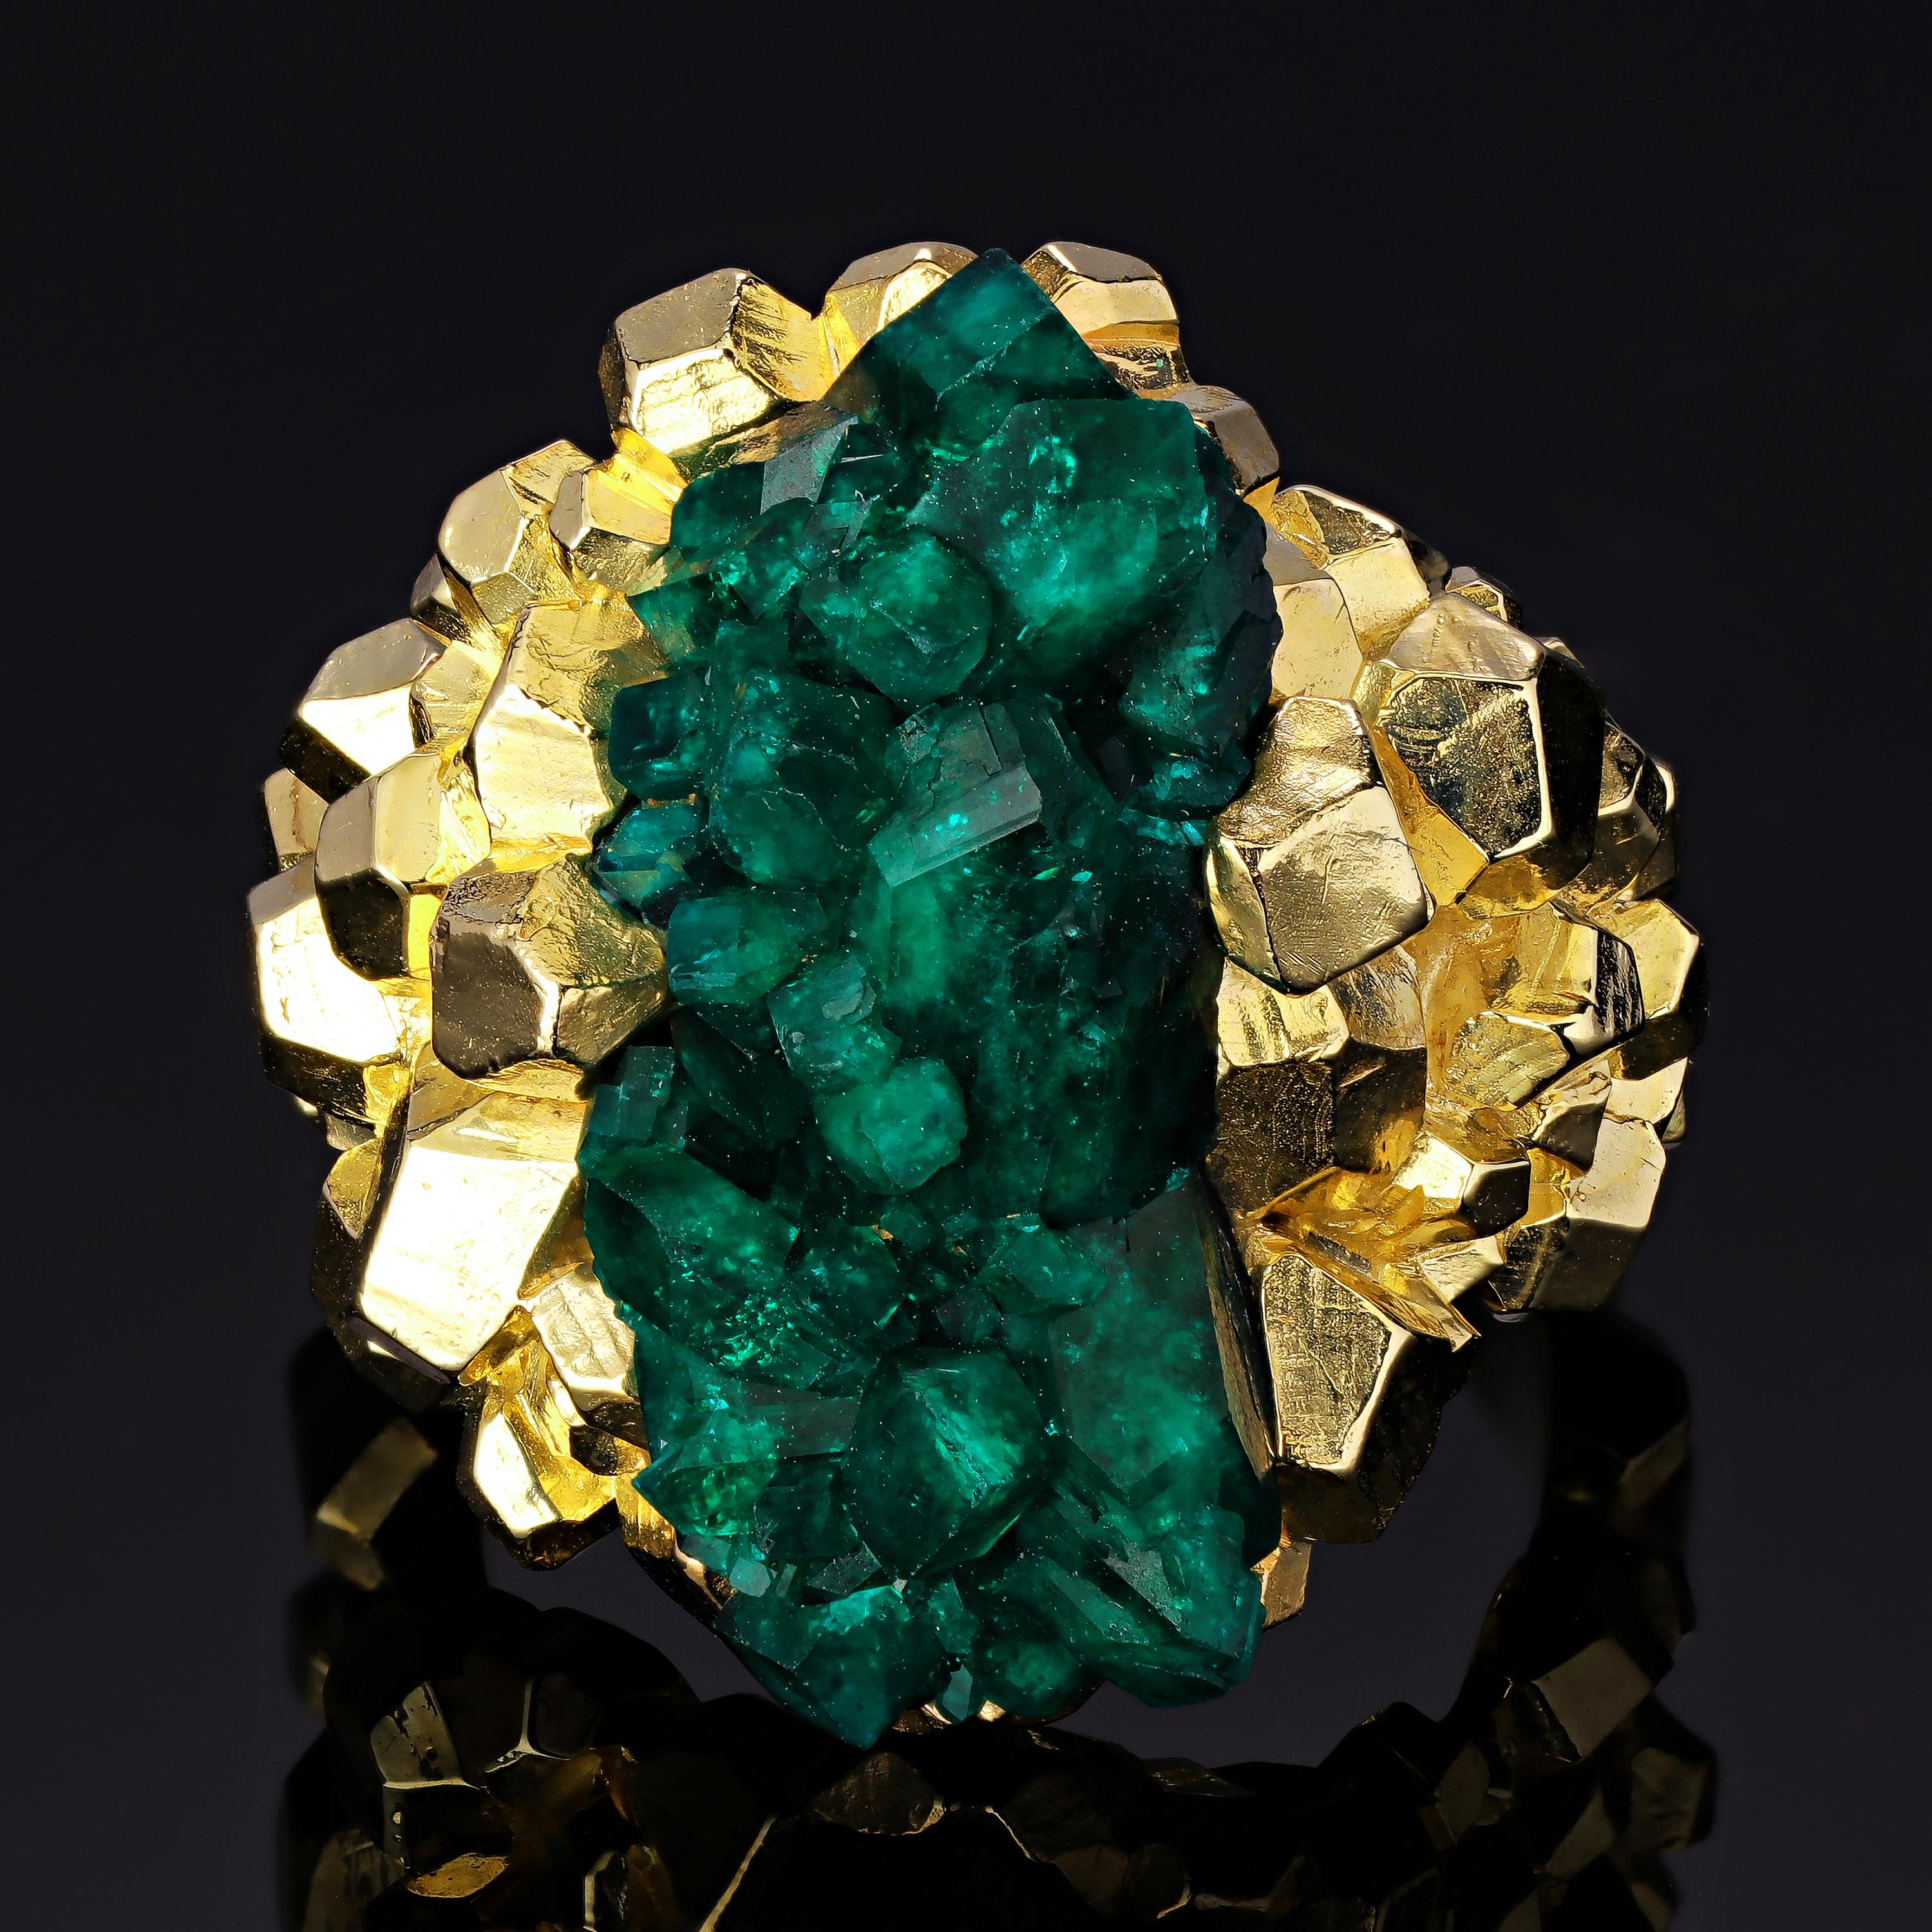 This incredible one of a kind ring showcases the natural beauty of the dioptase crystal, displaying it like a treasure-trove bursting with intense color in the center. Mined from Kazakhstan, this fine quality dioptase exhibits an intense